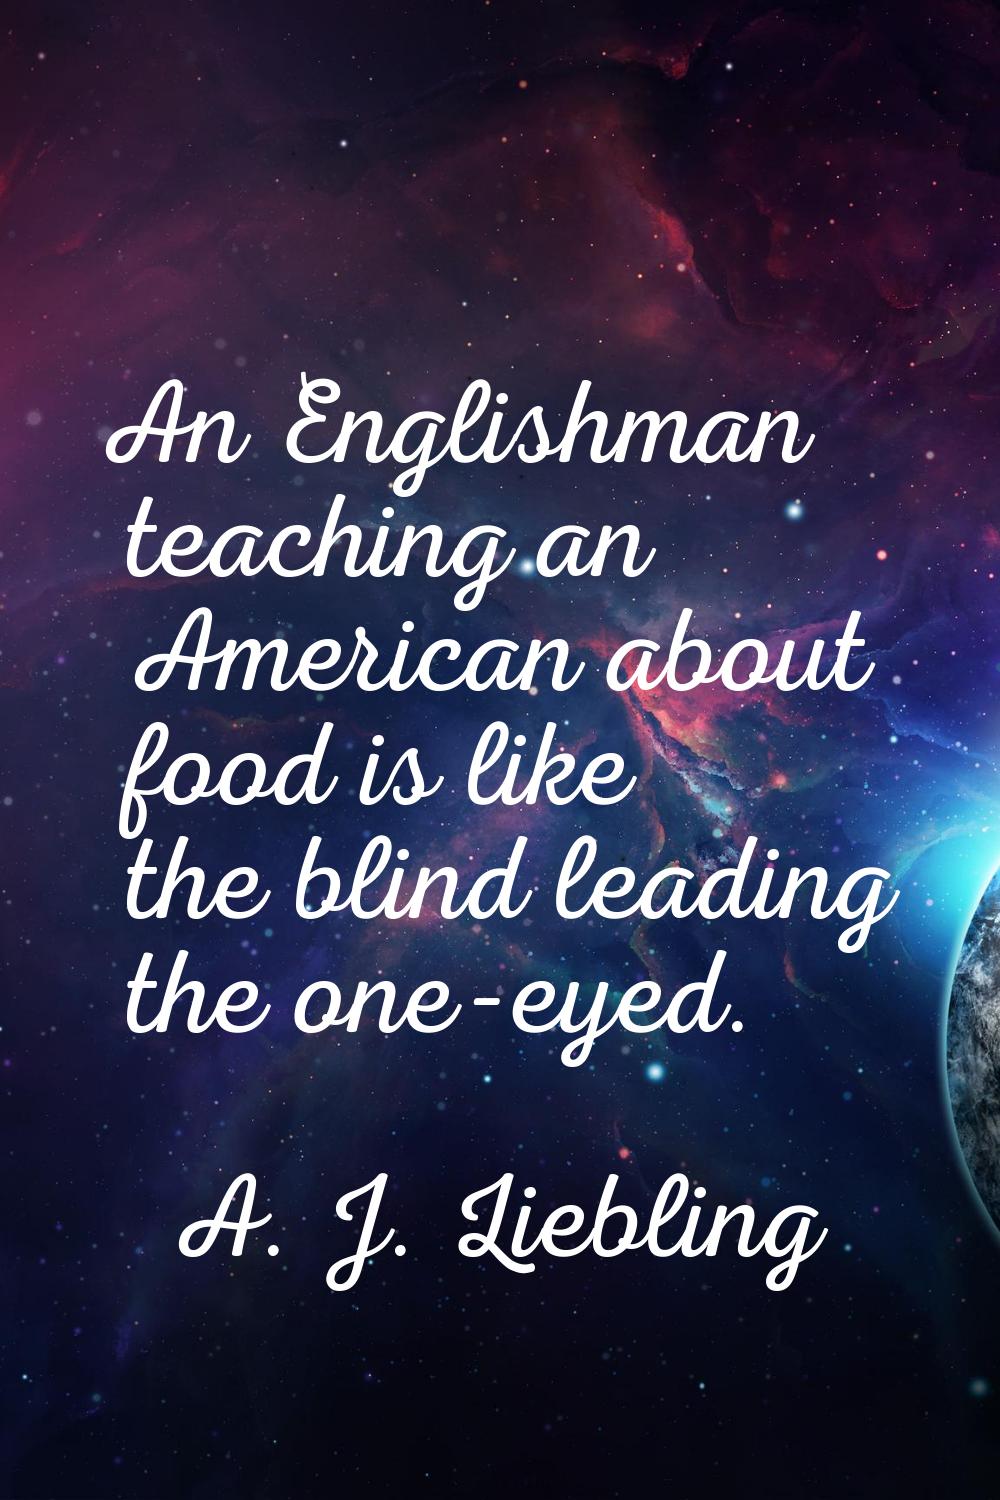 An Englishman teaching an American about food is like the blind leading the one-eyed.